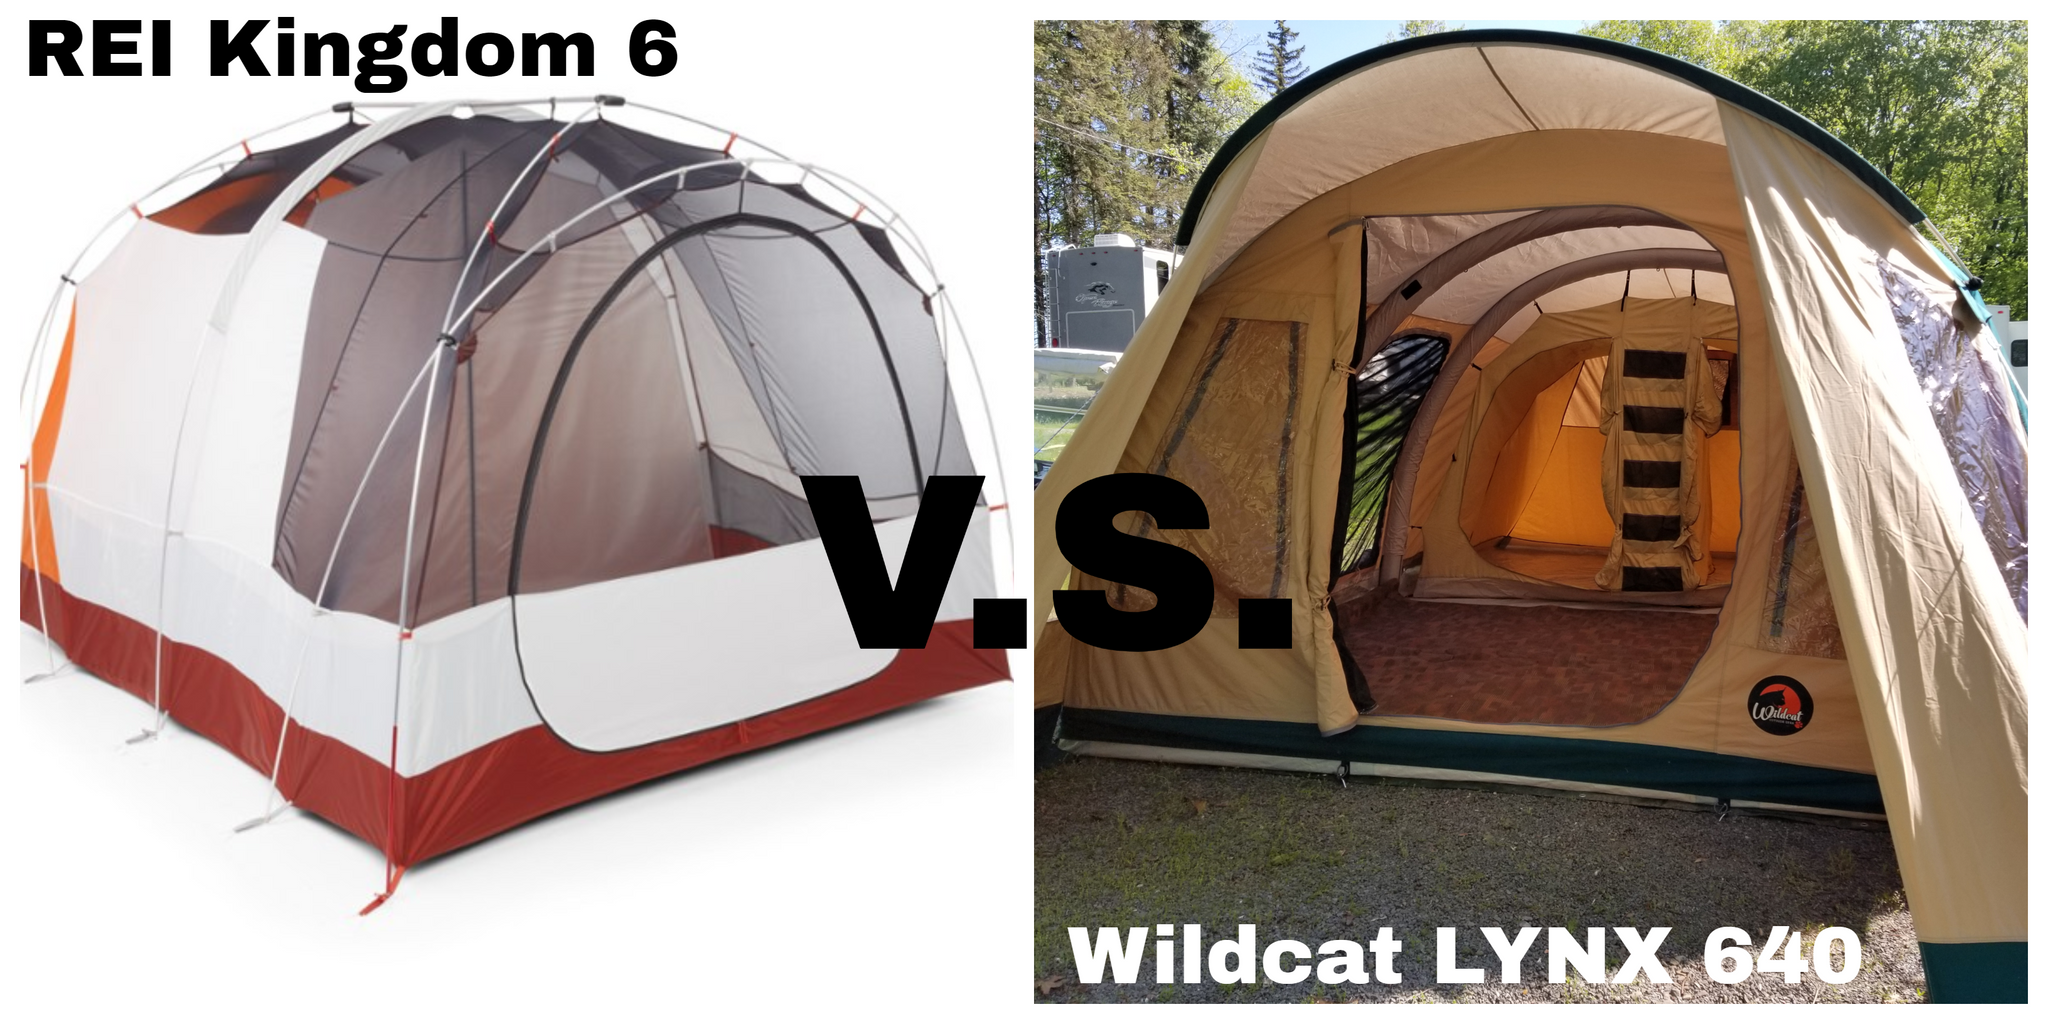 Wildcat LYNX 640 vs. REI Kingdom 6 Tent for Family Tent Camping